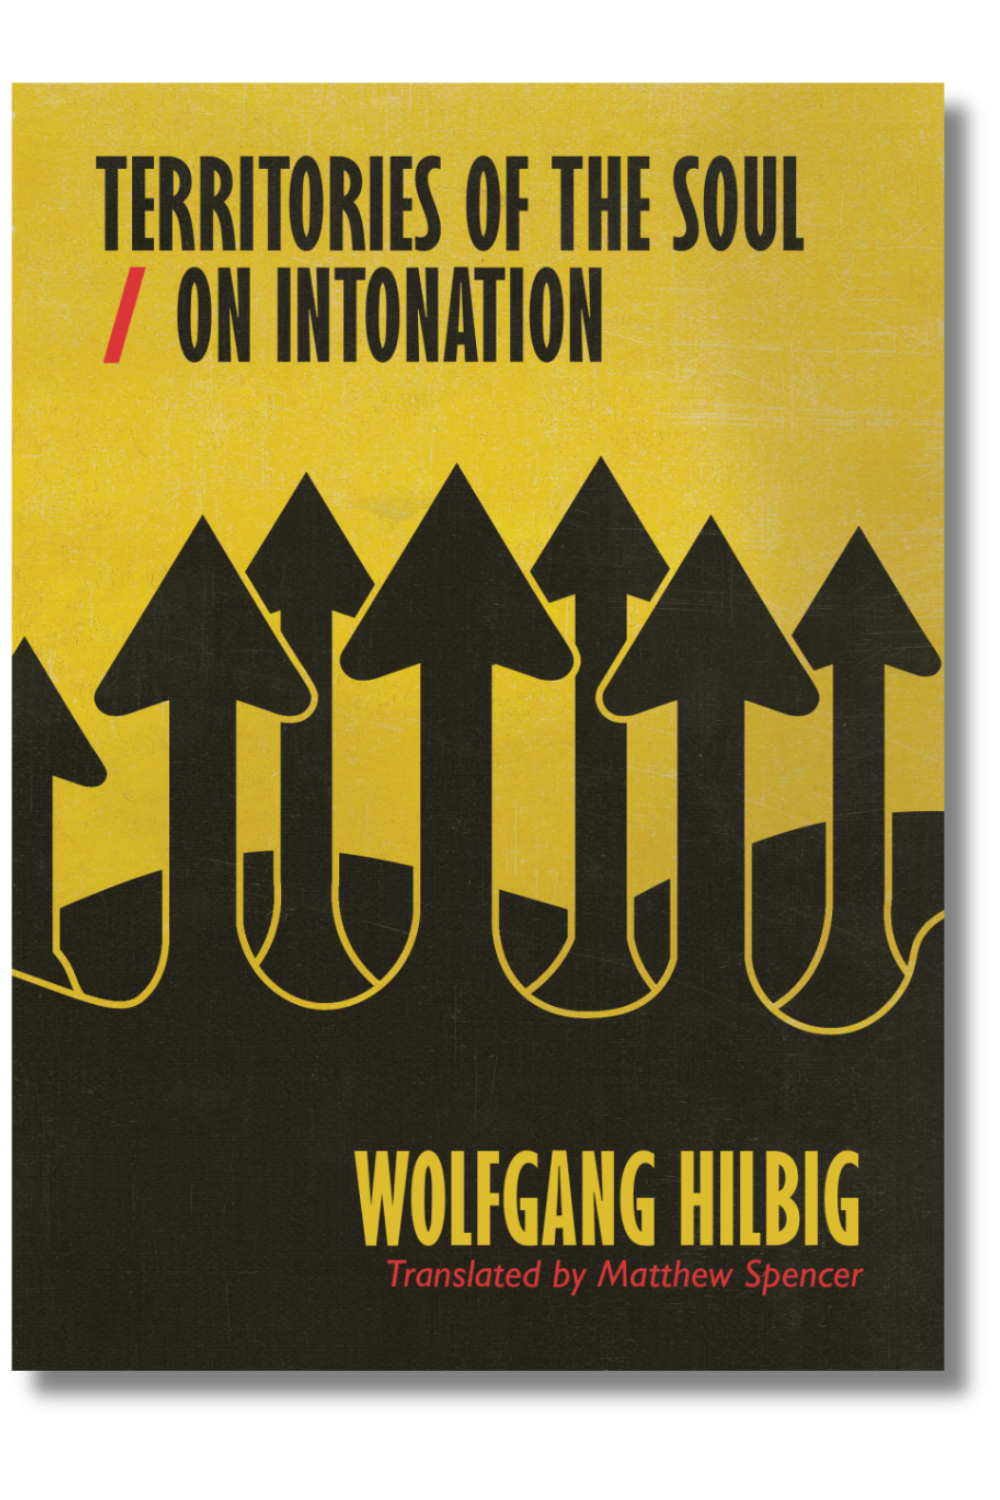 The cover of "Territories of the Soul / On Intonation" by Wolfgang Hilbig, translated by Matthew Spencer